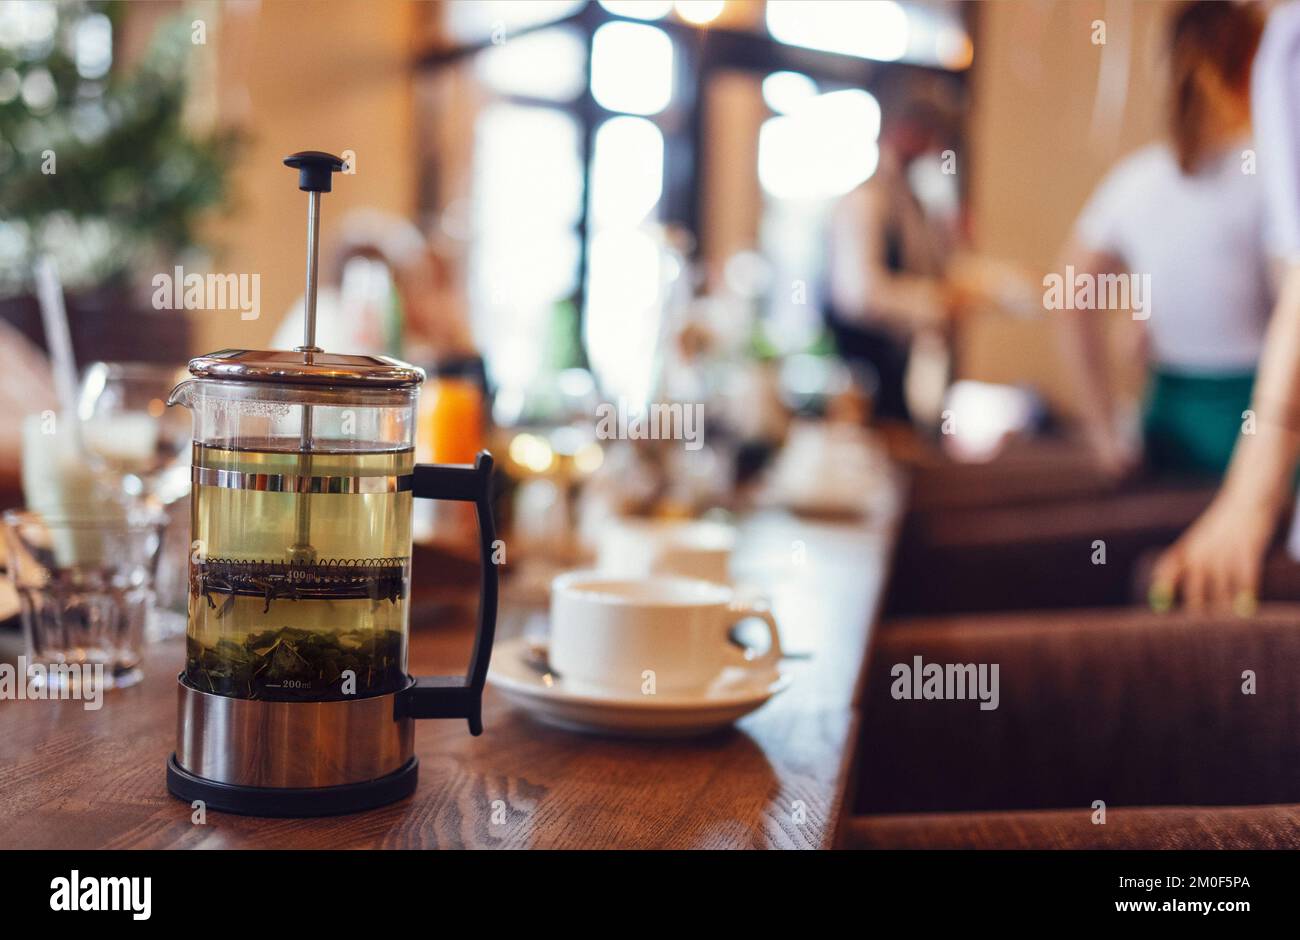 Close up of wooden table serving glass french press tea maker, cups with fresh beverage and sweet pastry on plate in cafe Stock Photo